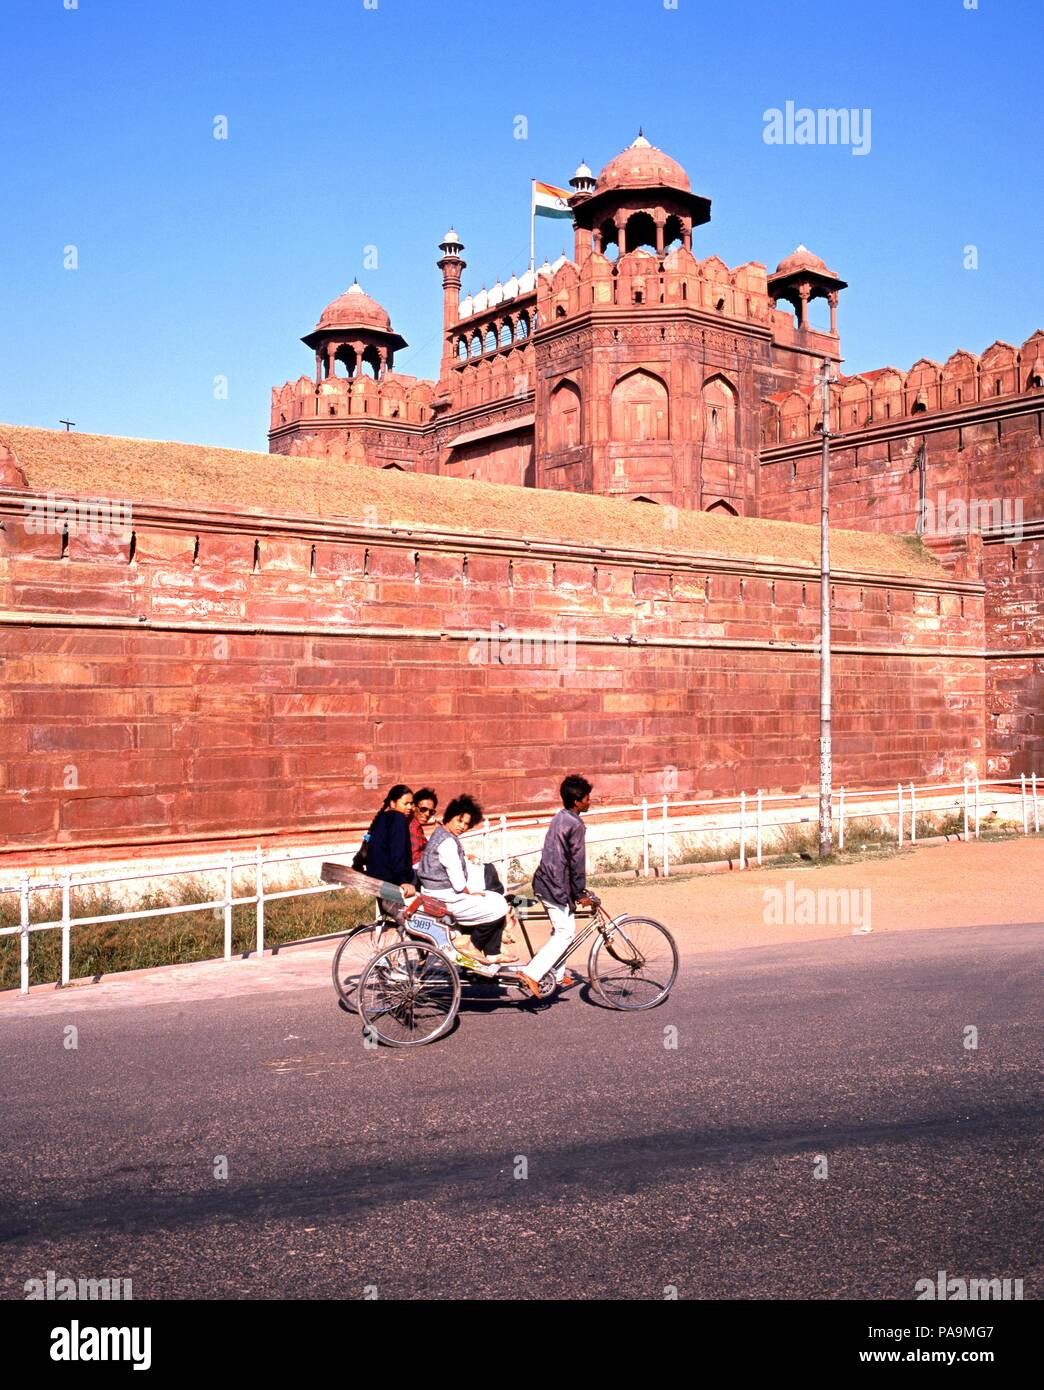 View of the Red Fort with local people on a tricycle in the foreground, Delhi, Delhi Union Territory, India. Stock Photo